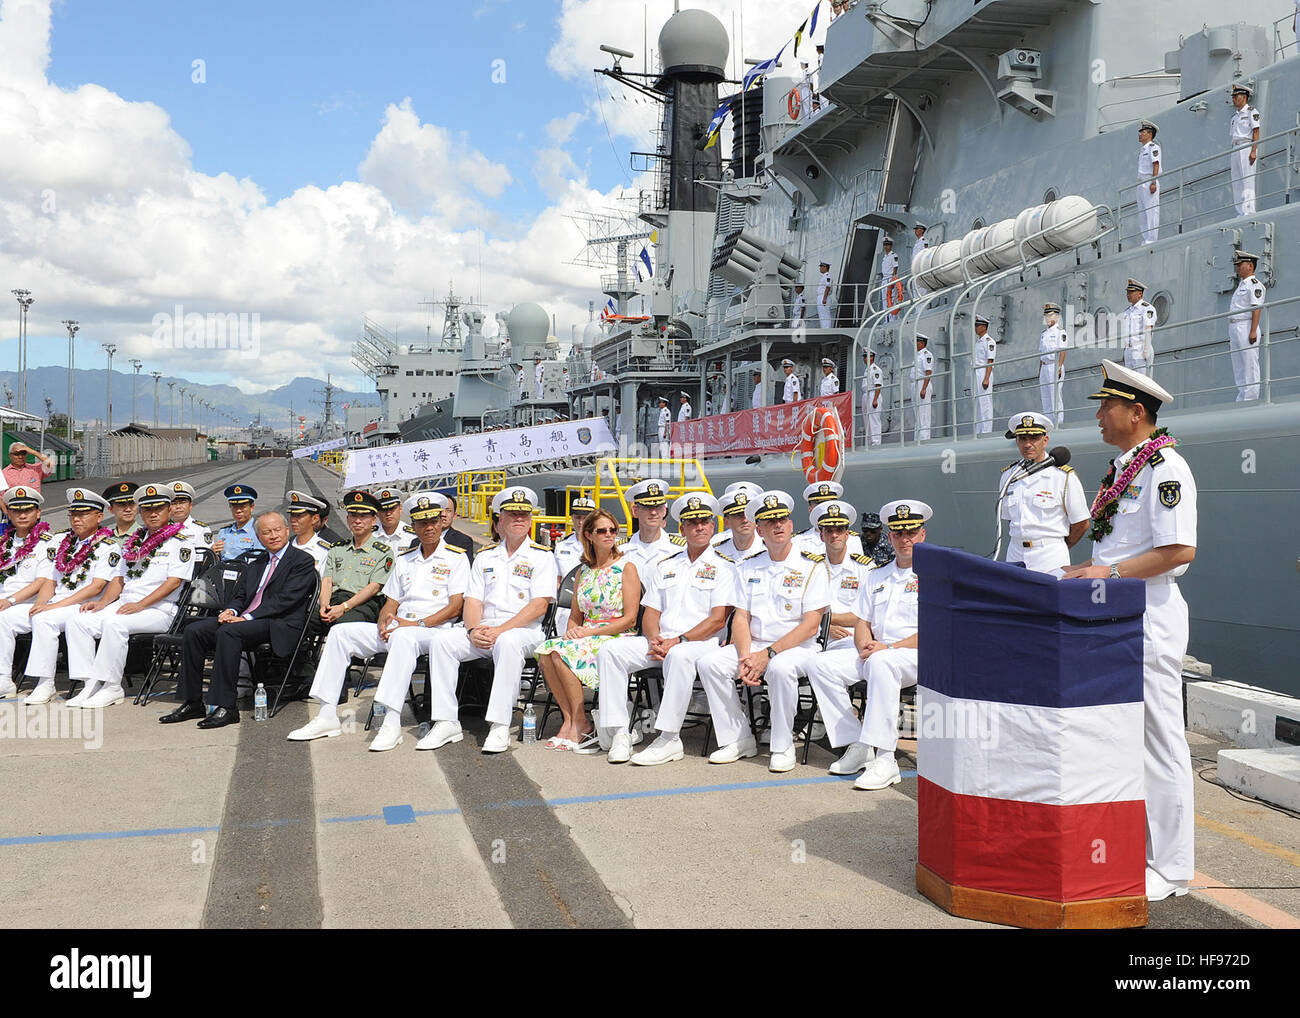 130906-N-ZK021-012 – PEARL HARBOR-HICKAM (Sept. 6, 2013) – Rear Adm. Wei Gang, Chief of Staff, North Sea Fleet (Head of Delegation) gives remarks during an arrival ceremony for three People’s Liberation Army-Navy ships Luhu-class destroyer Qingdao (DDG 113), Jiangkai-class frigate Linyi (FFG 547) and a Fuqing-class fleet oiler as they arrive in Hawaii for a scheduled port visit. Over the weekend, Chinese and U.S. leaders will conduct dialogues to build confidence and mutual understanding between the two nations. The port visit is part of the U.S. Navy’s ongoing effort to maximize opportunities Stock Photo